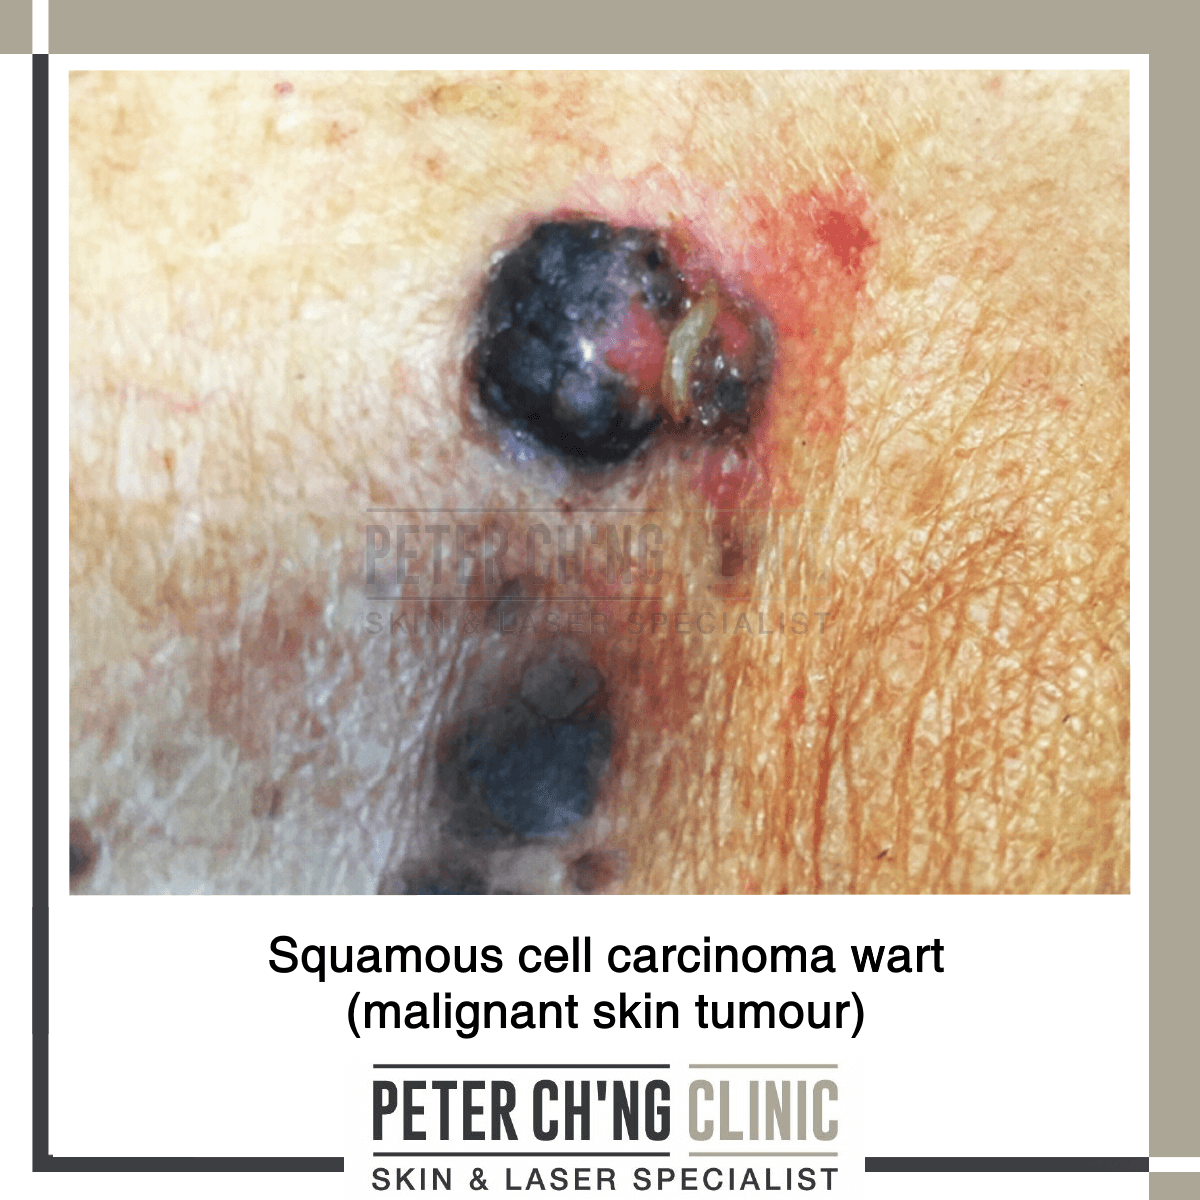 Squamous cell carcinoma wart